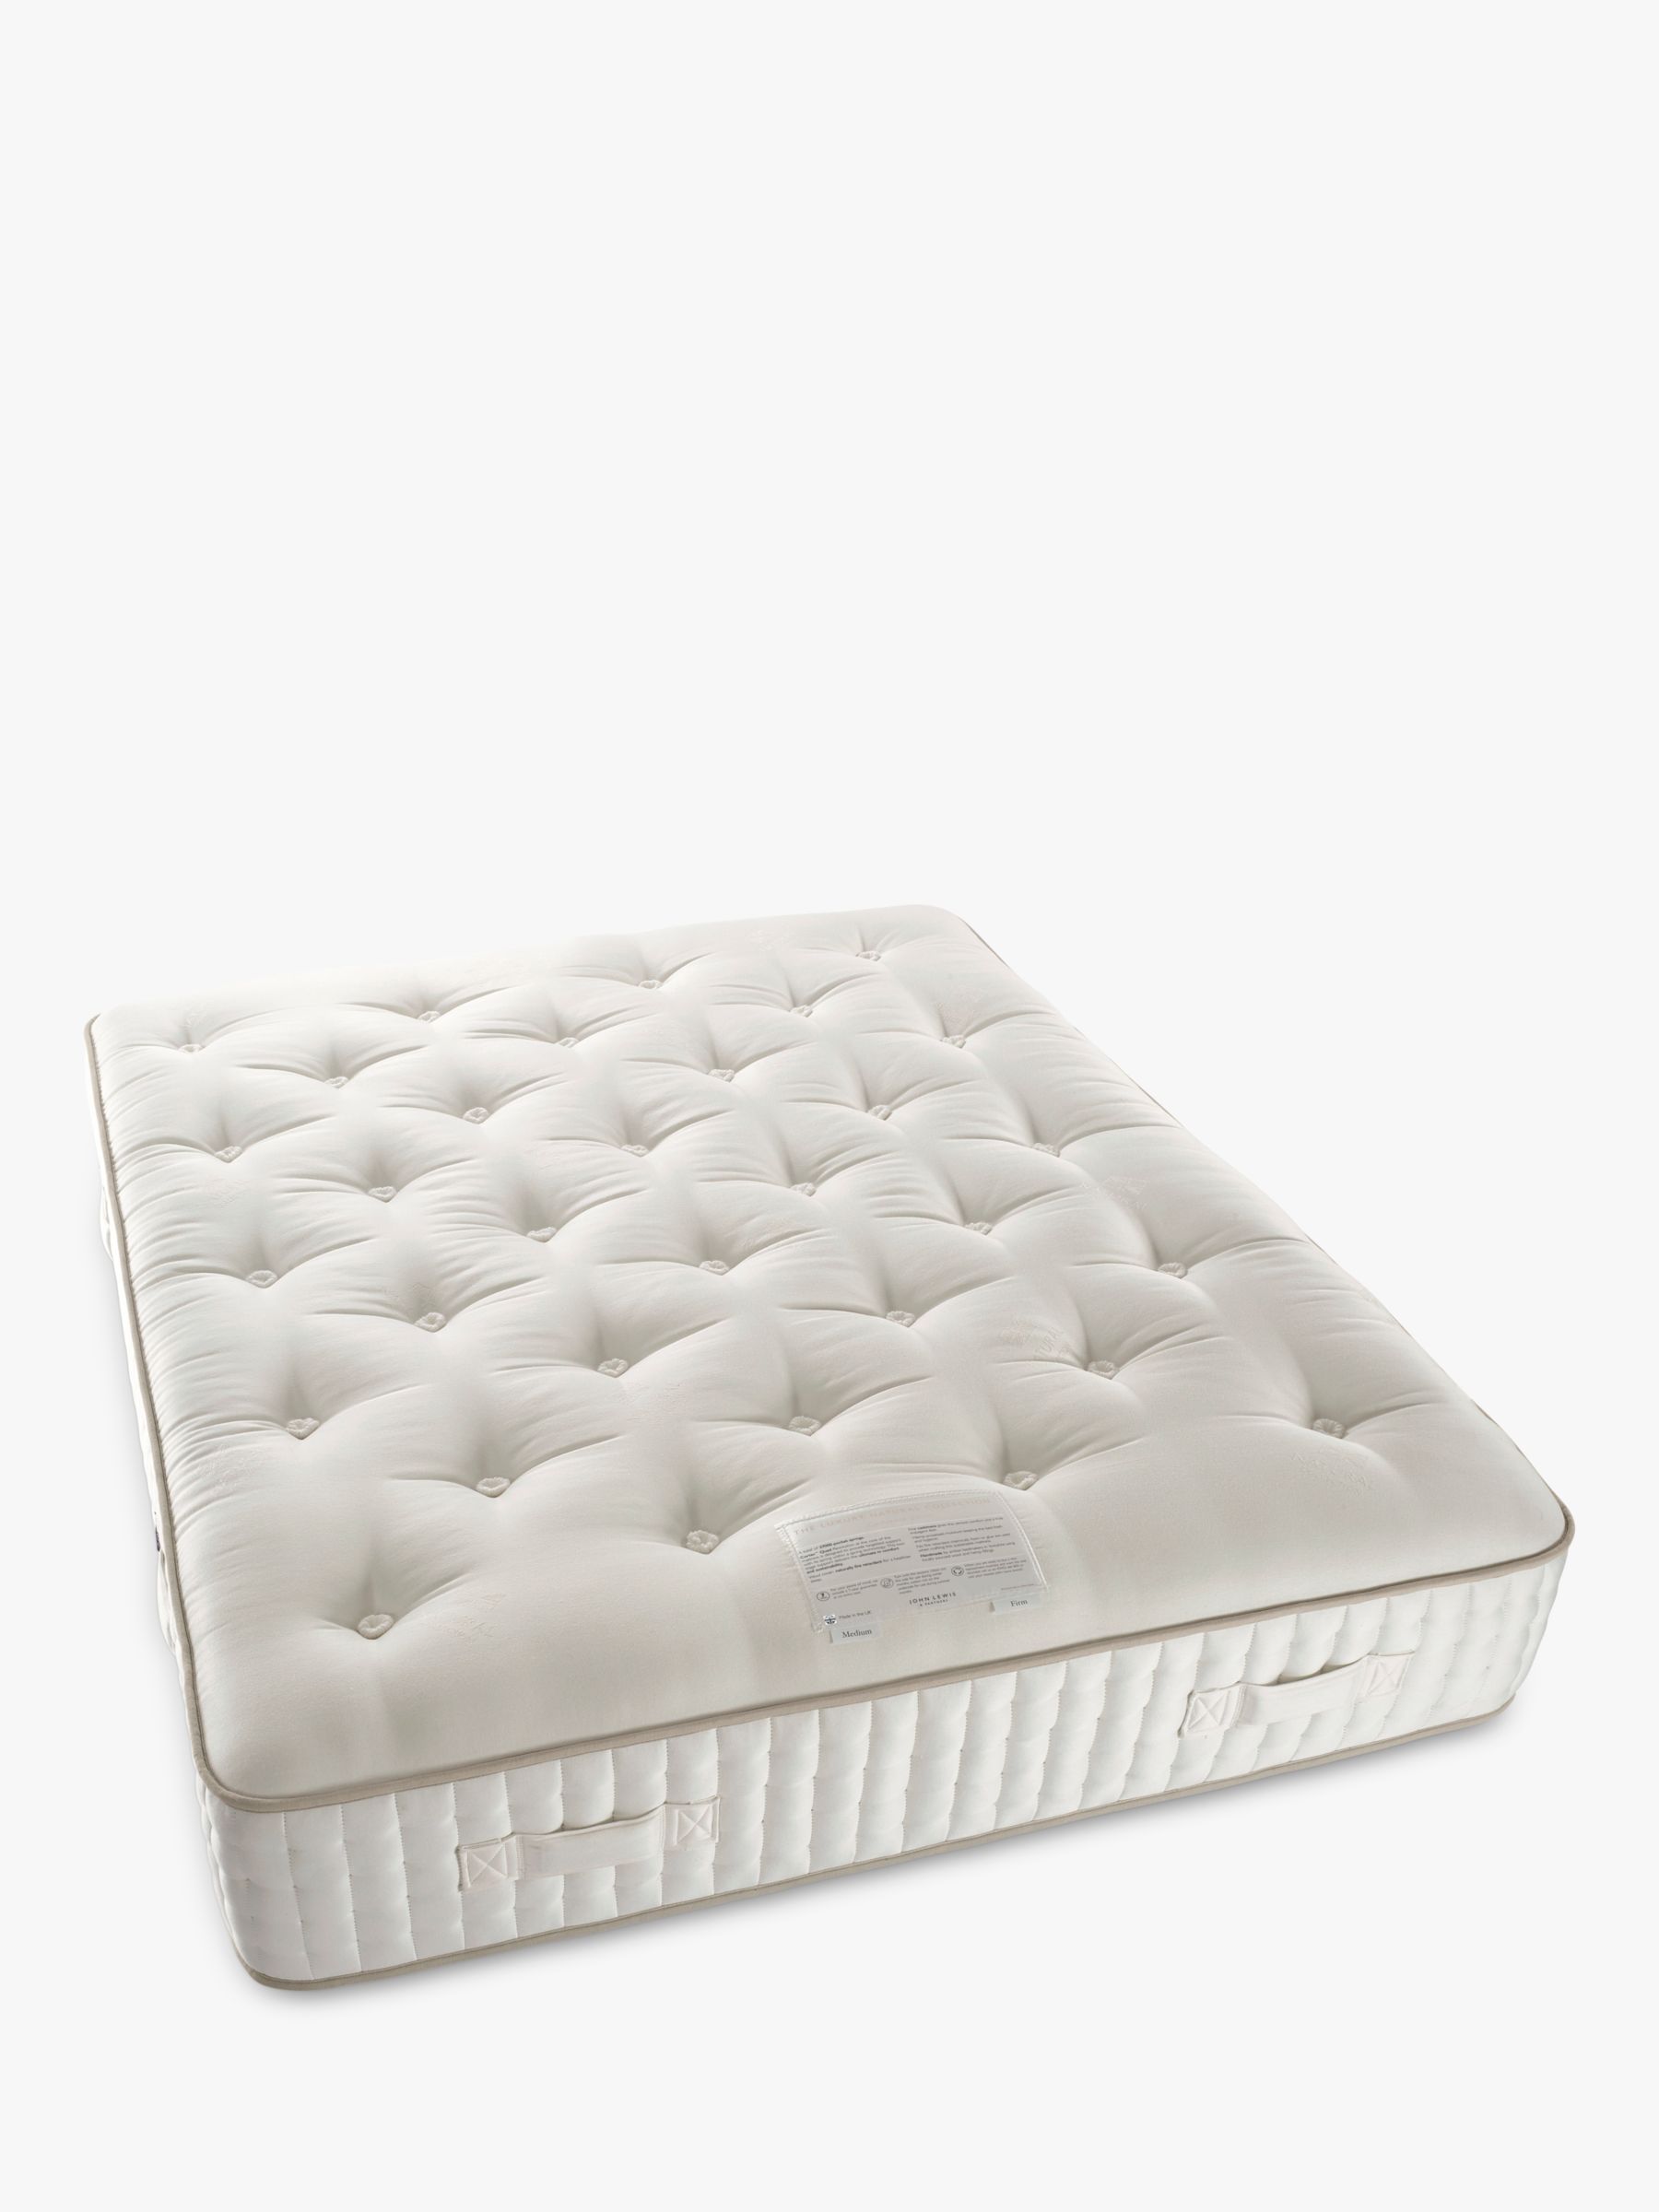 Photo of John lewis luxury natural collection cashmere 27000 double firmer tension pocket spring mattress